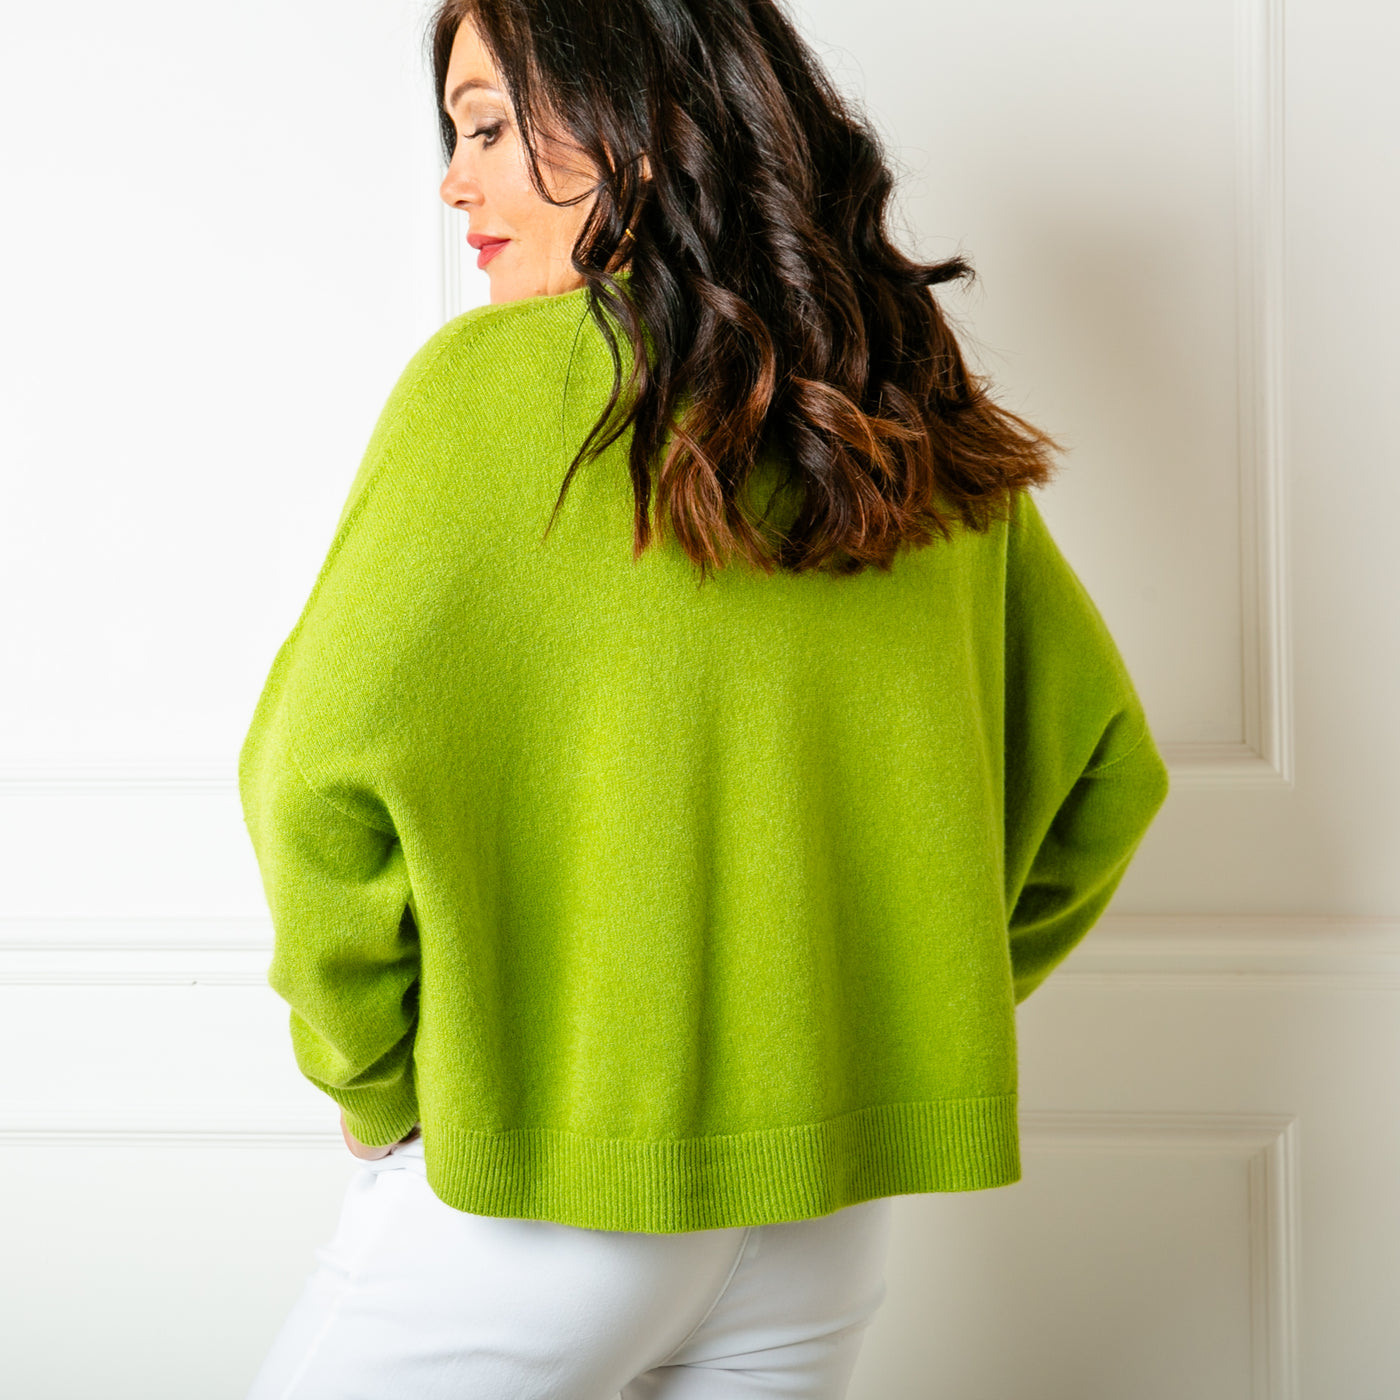 The chartreuse green V Neck Short Jumper made from a fine knitted blend perfect for summer evenings